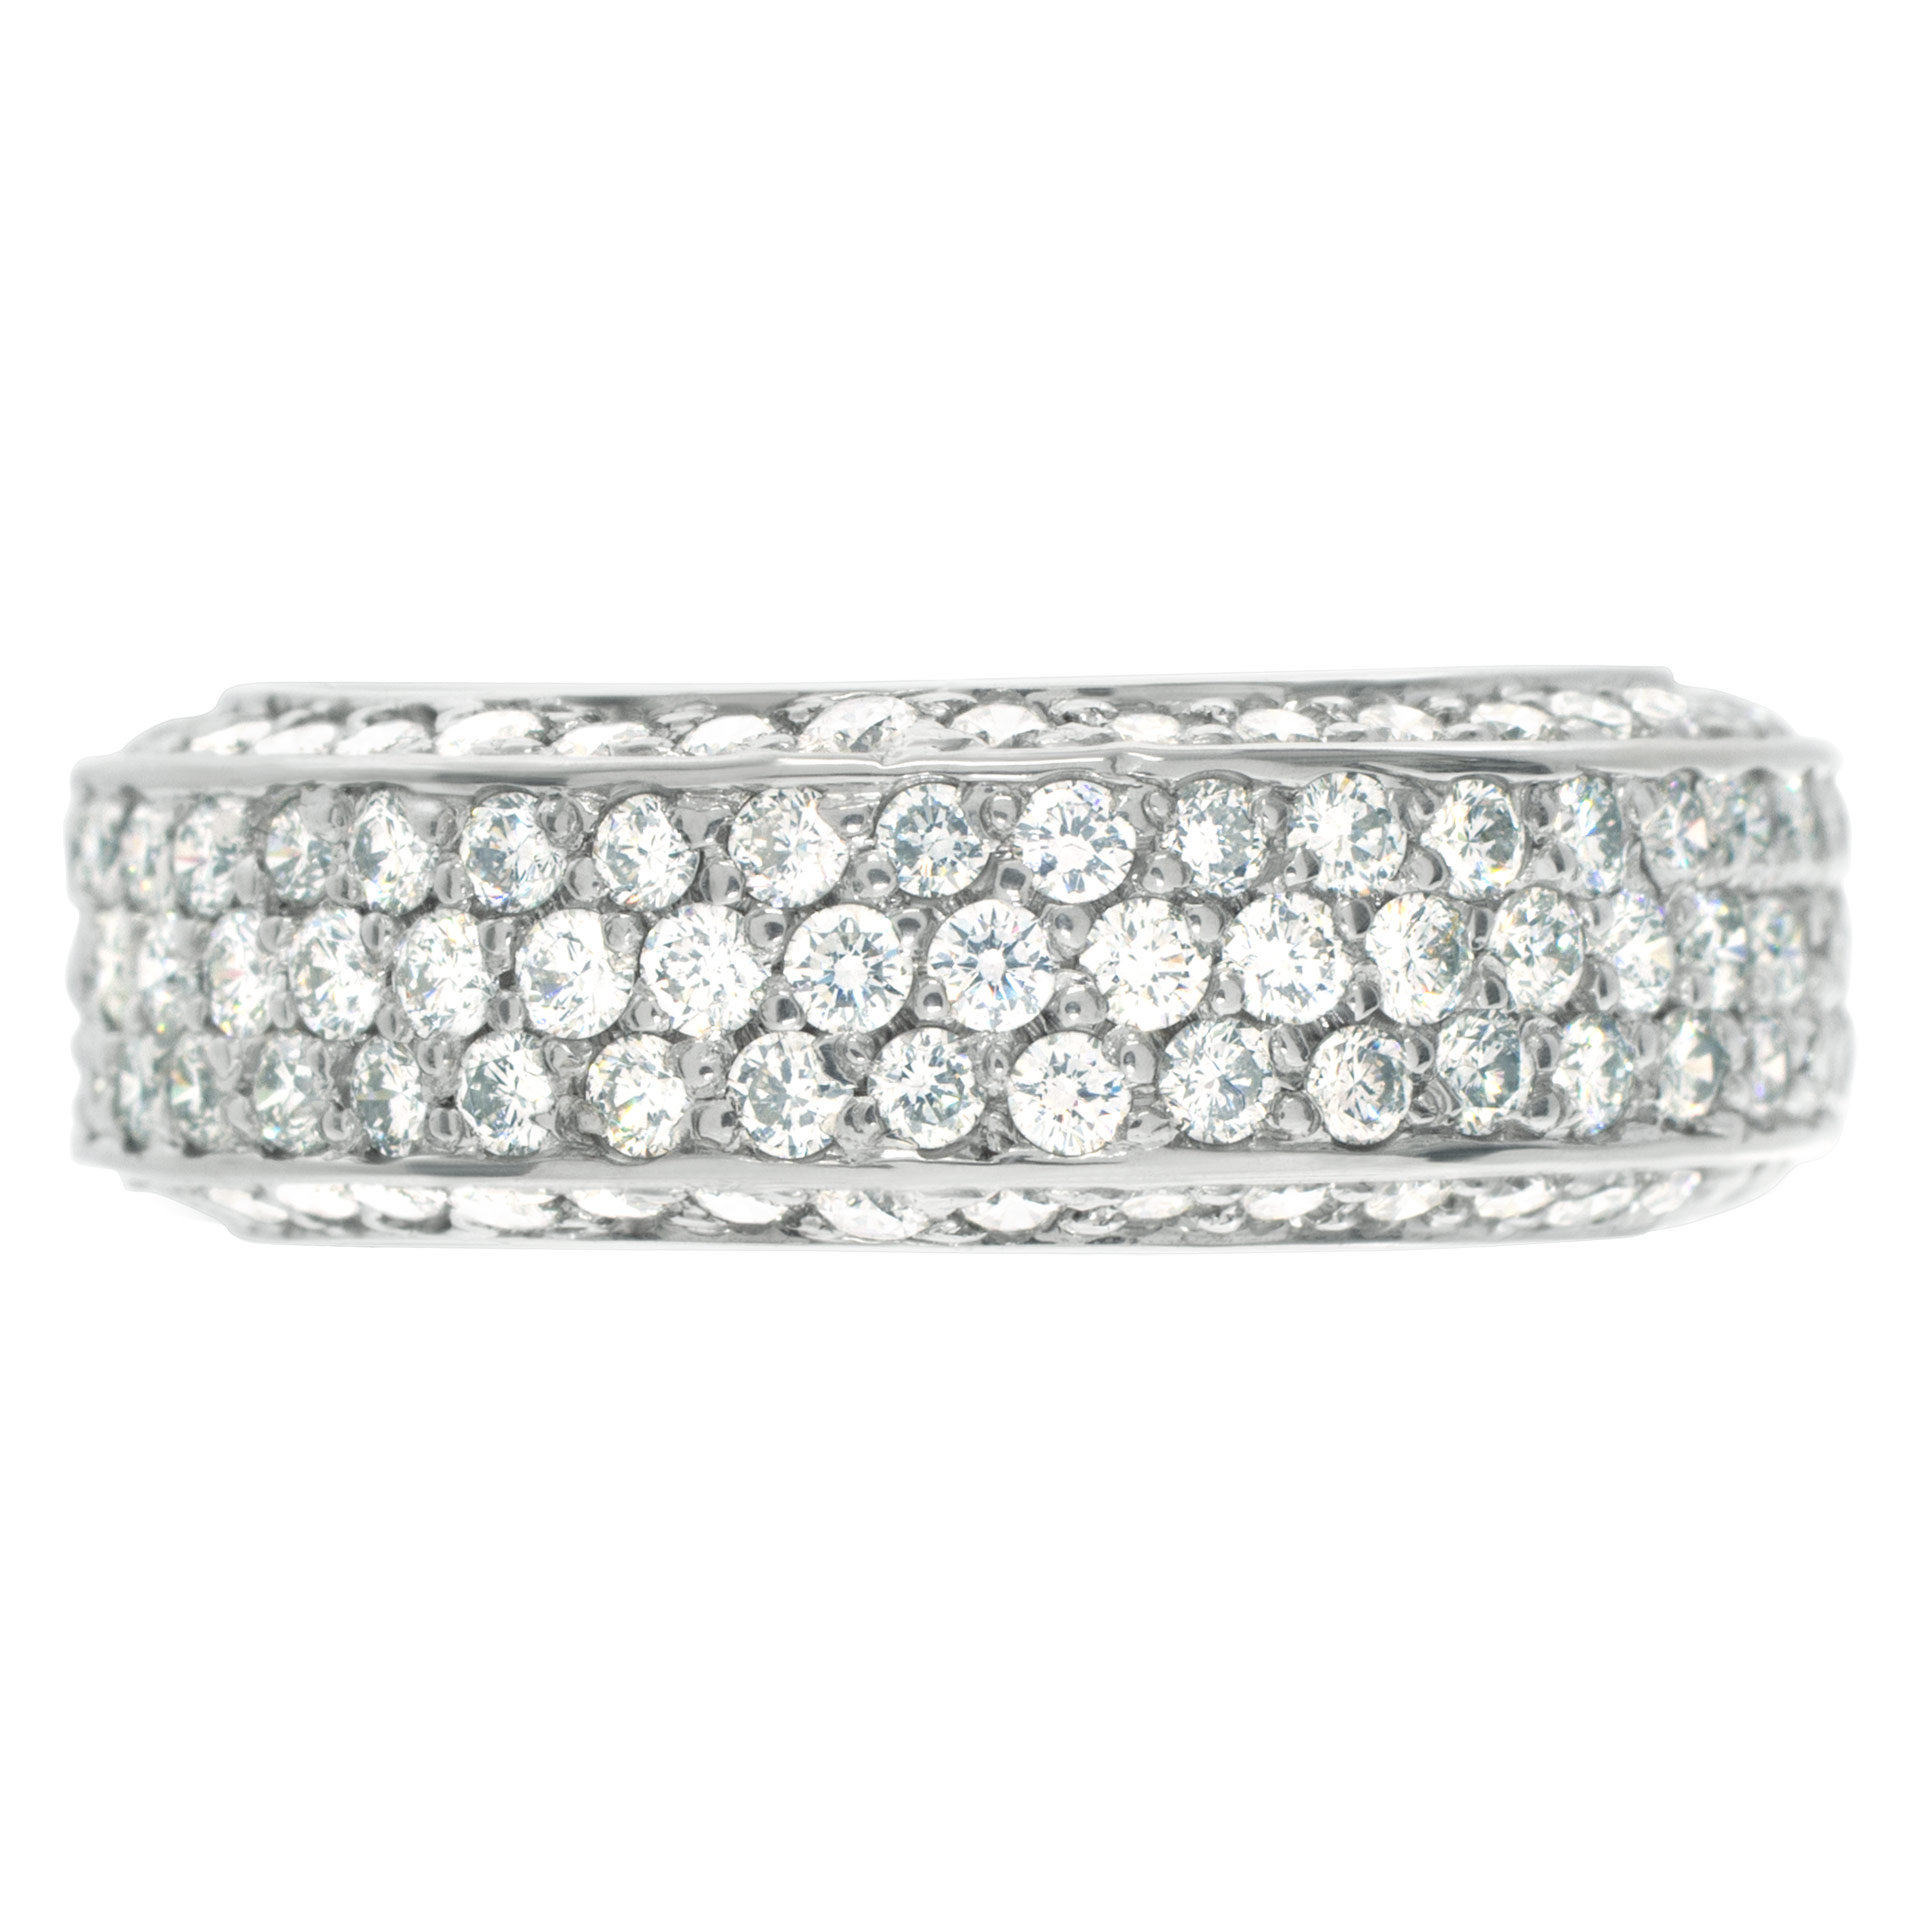 Pave Diamond Eternity Band and Ring with over 1.5 carats Diamonds set in 18K White gold